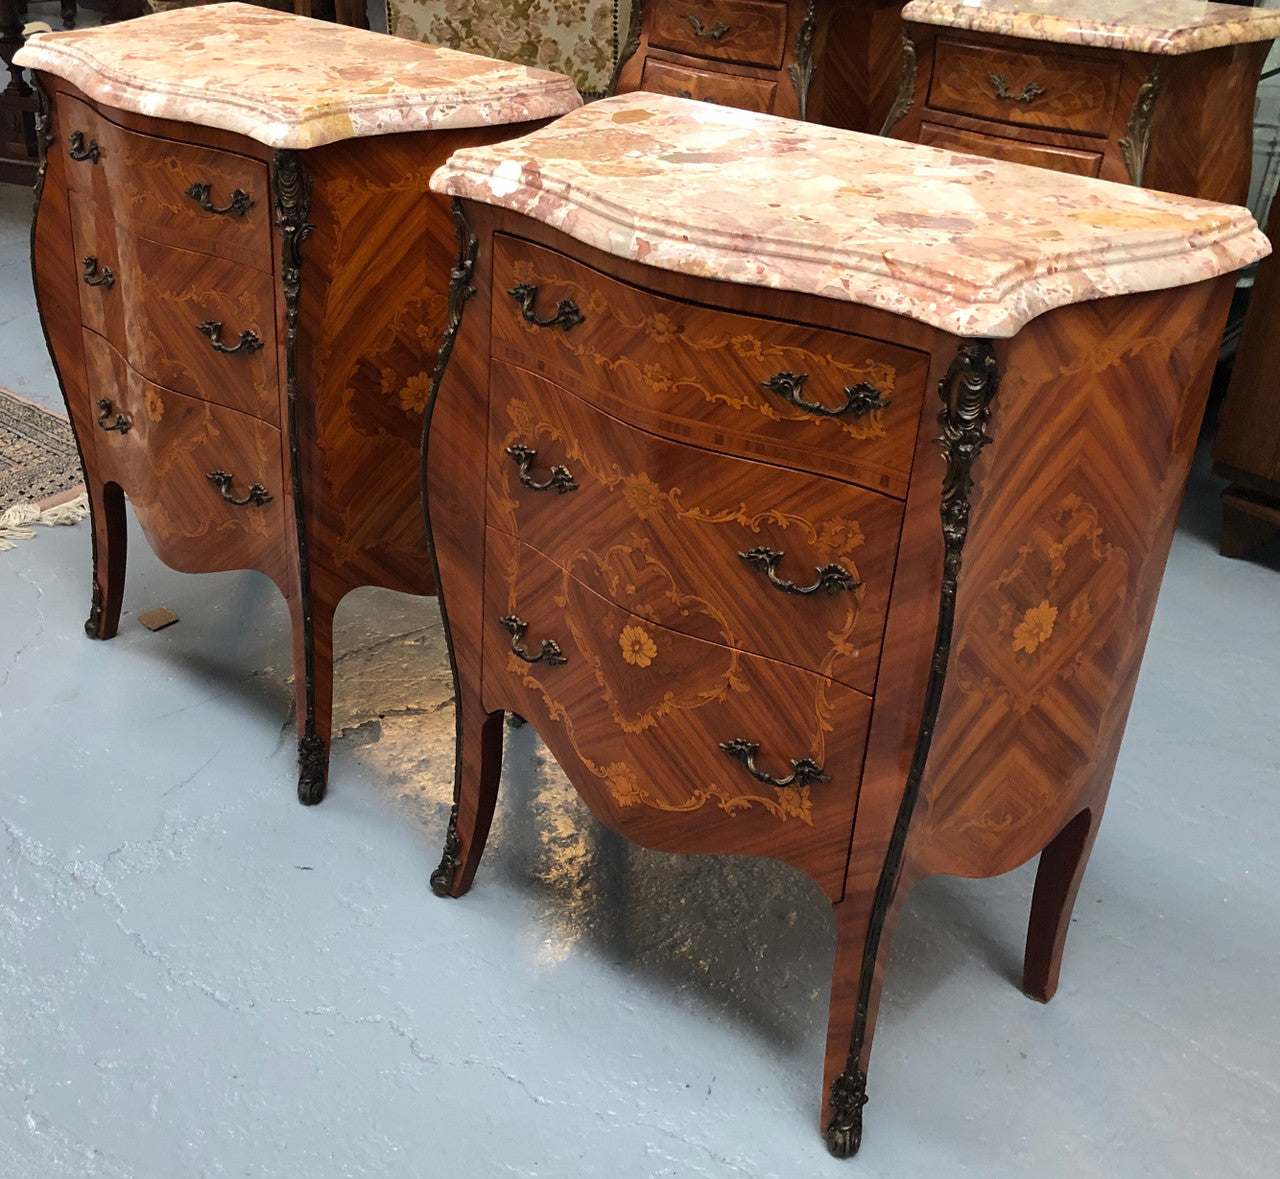 Rare Pair of French miniature commode bedsides with beautiful marquetry inlay & ormolu mount. Circa 1950's and are in very good condition.